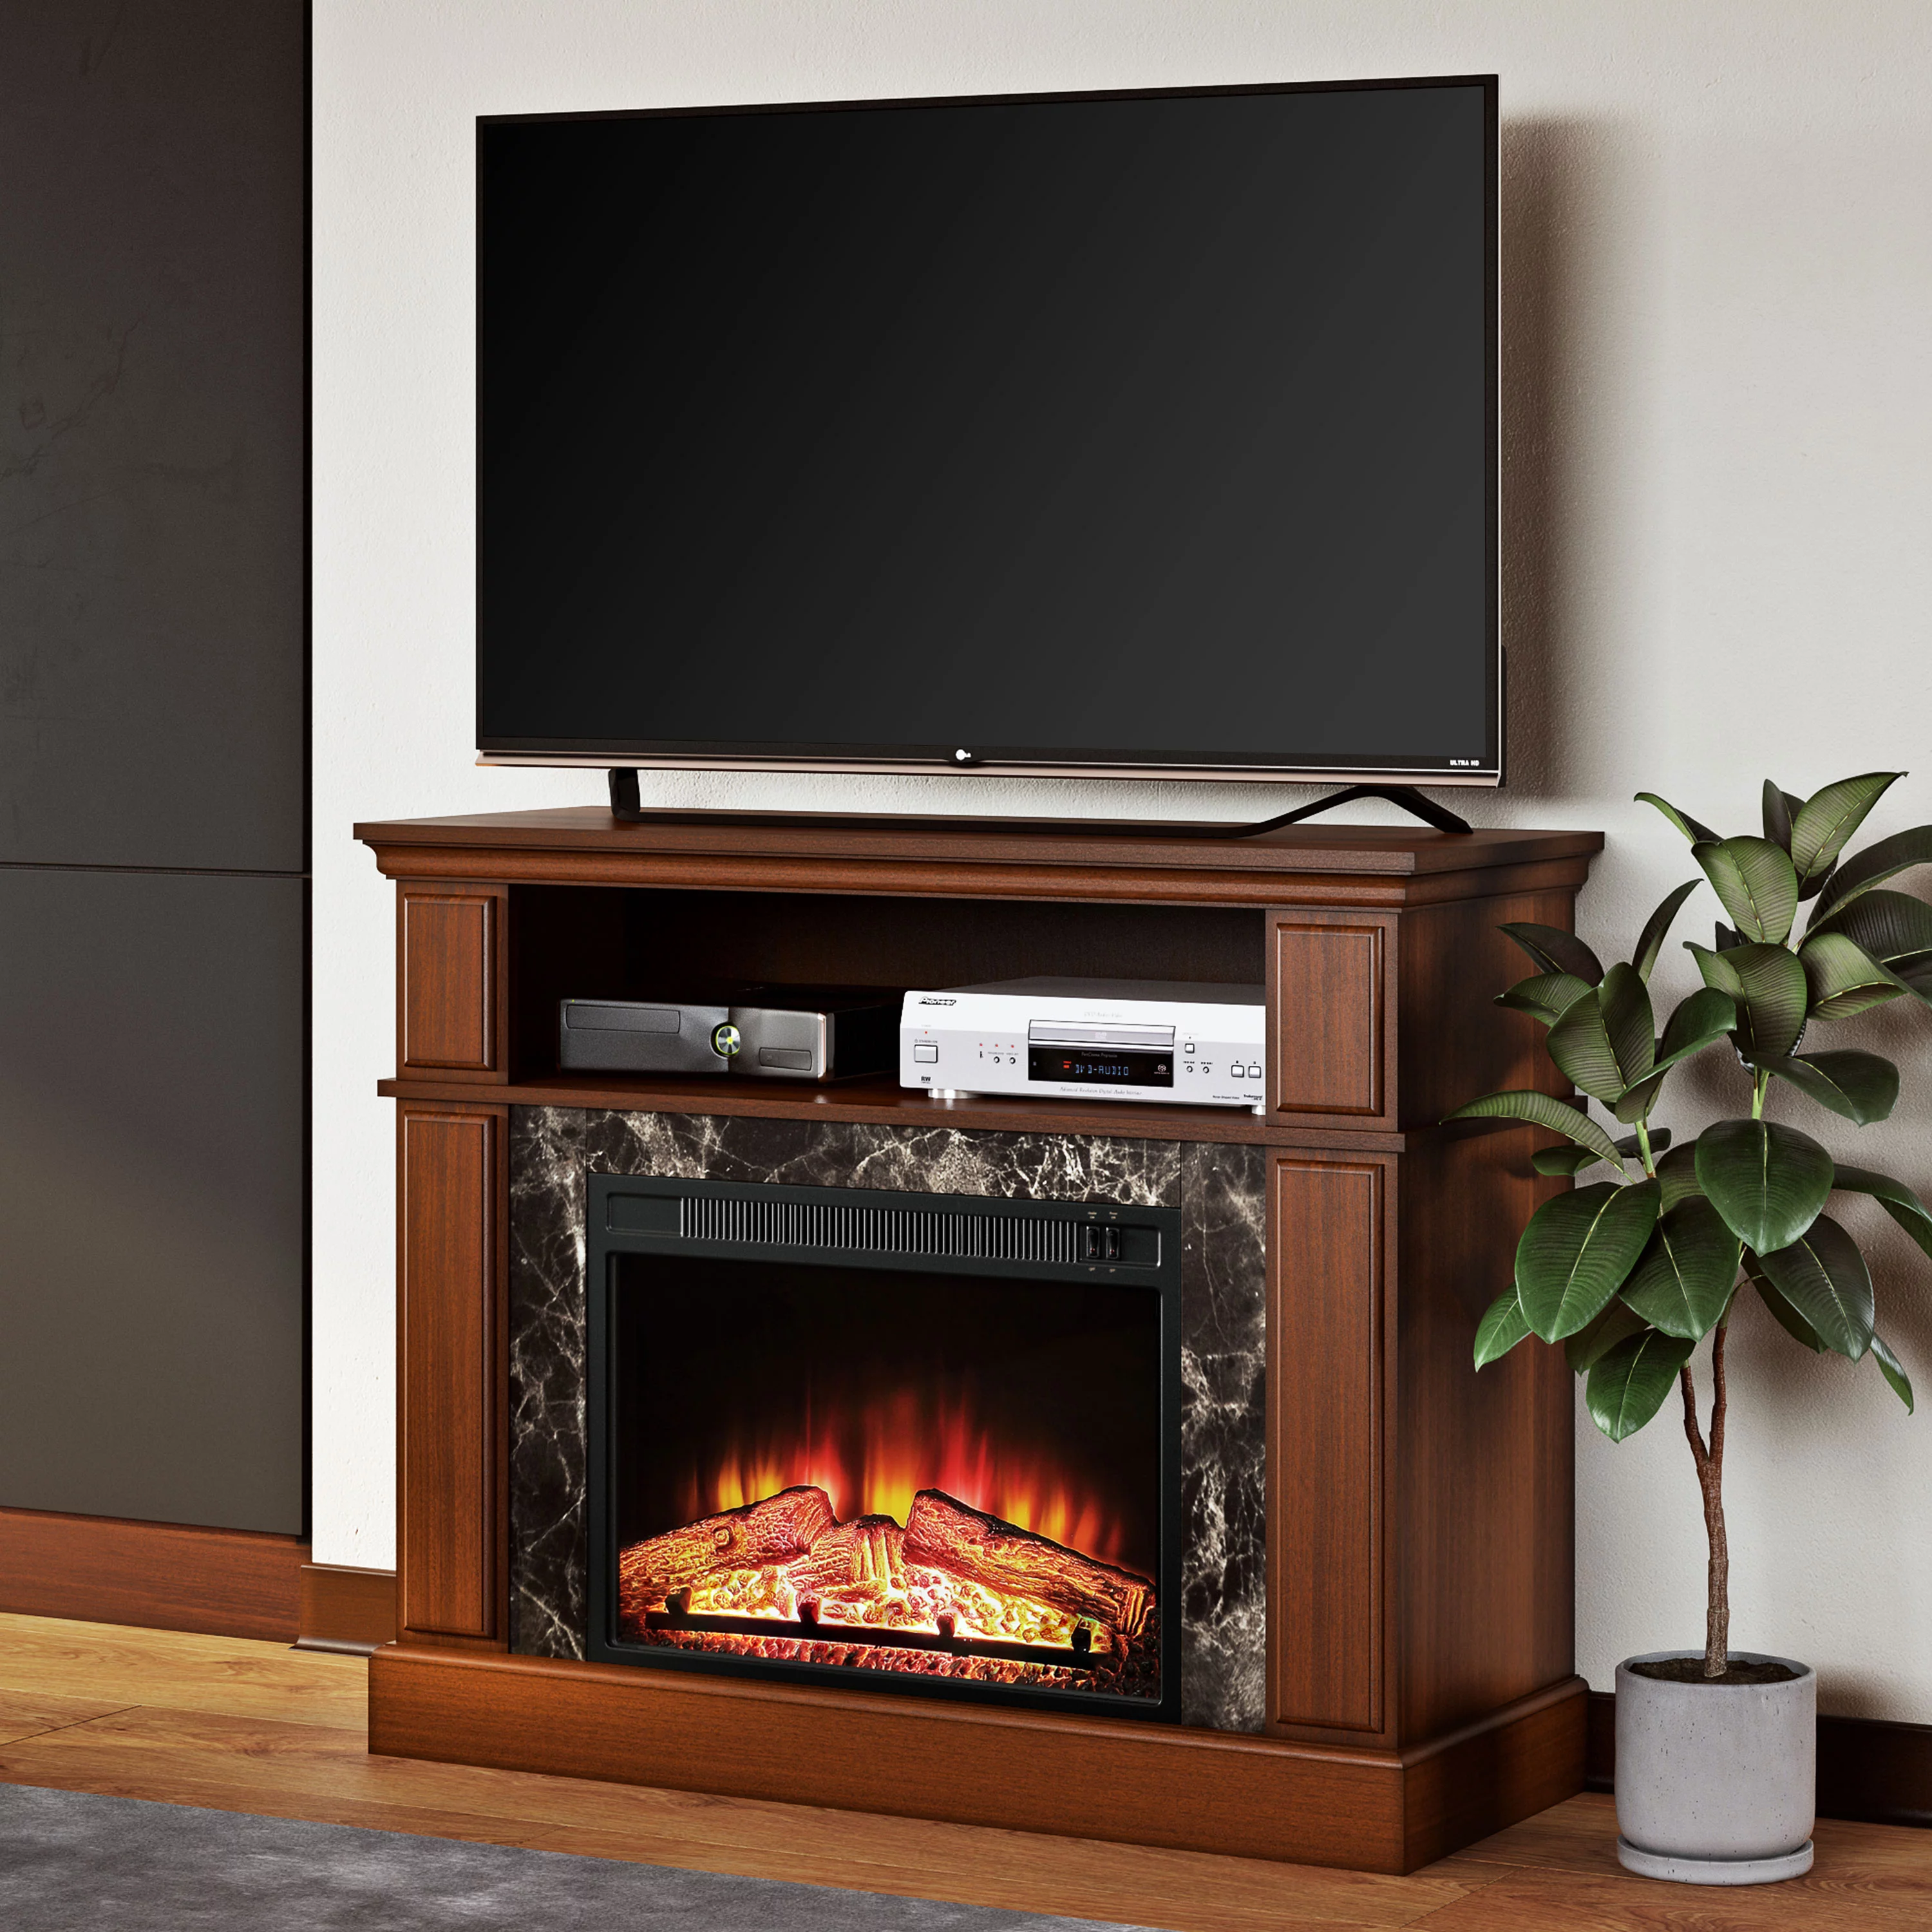 Mainstays Loring Media Fireplace for TVs up to 48", Cherry